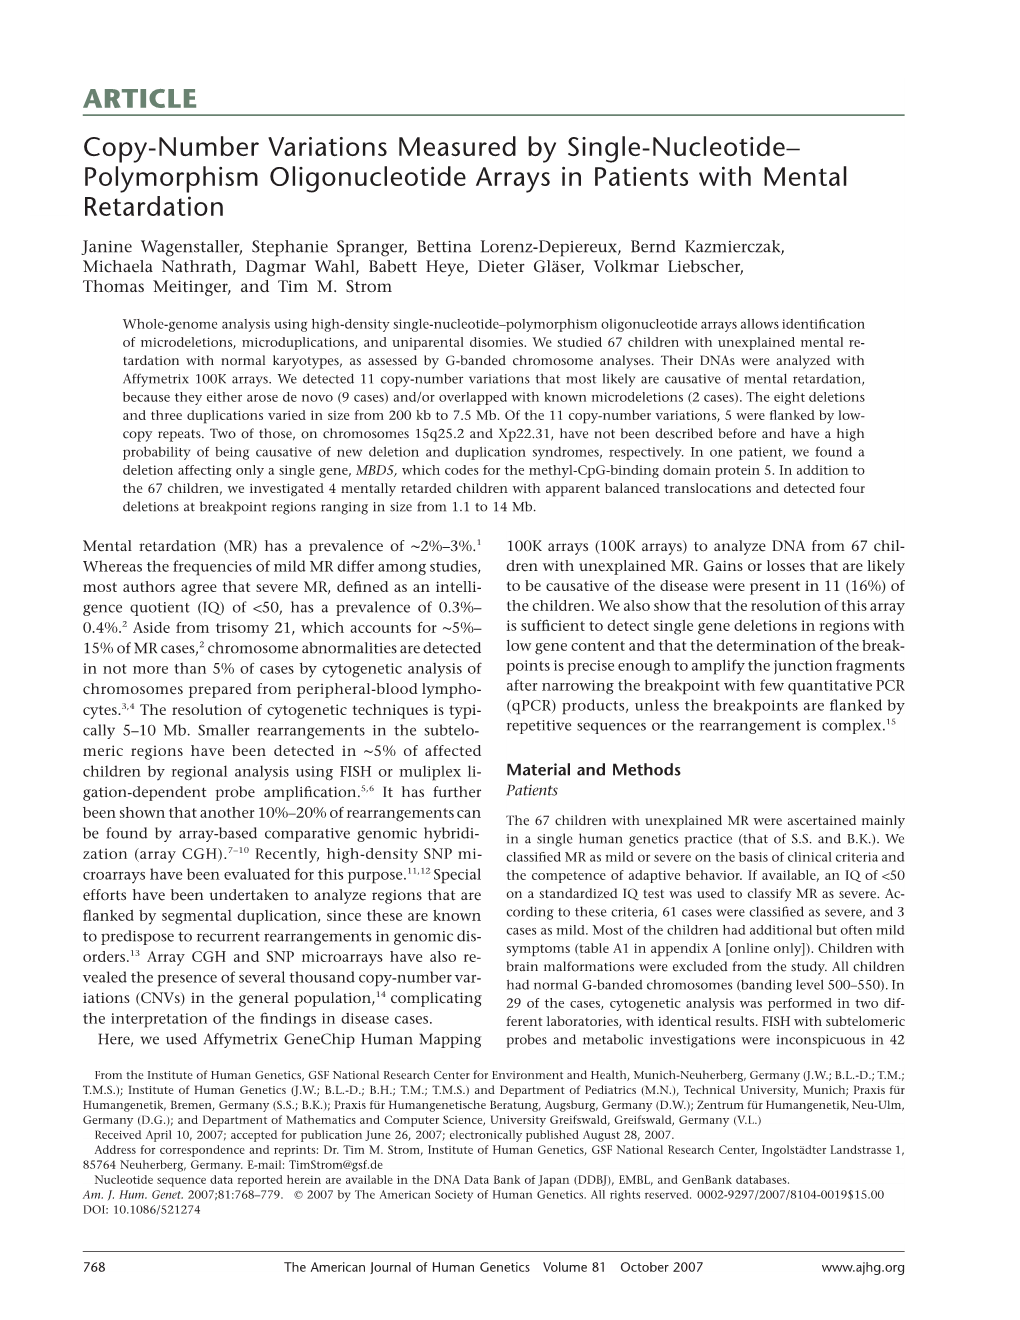 Polymorphism Oligonucleotide Arrays in Patients with Mental Retardation